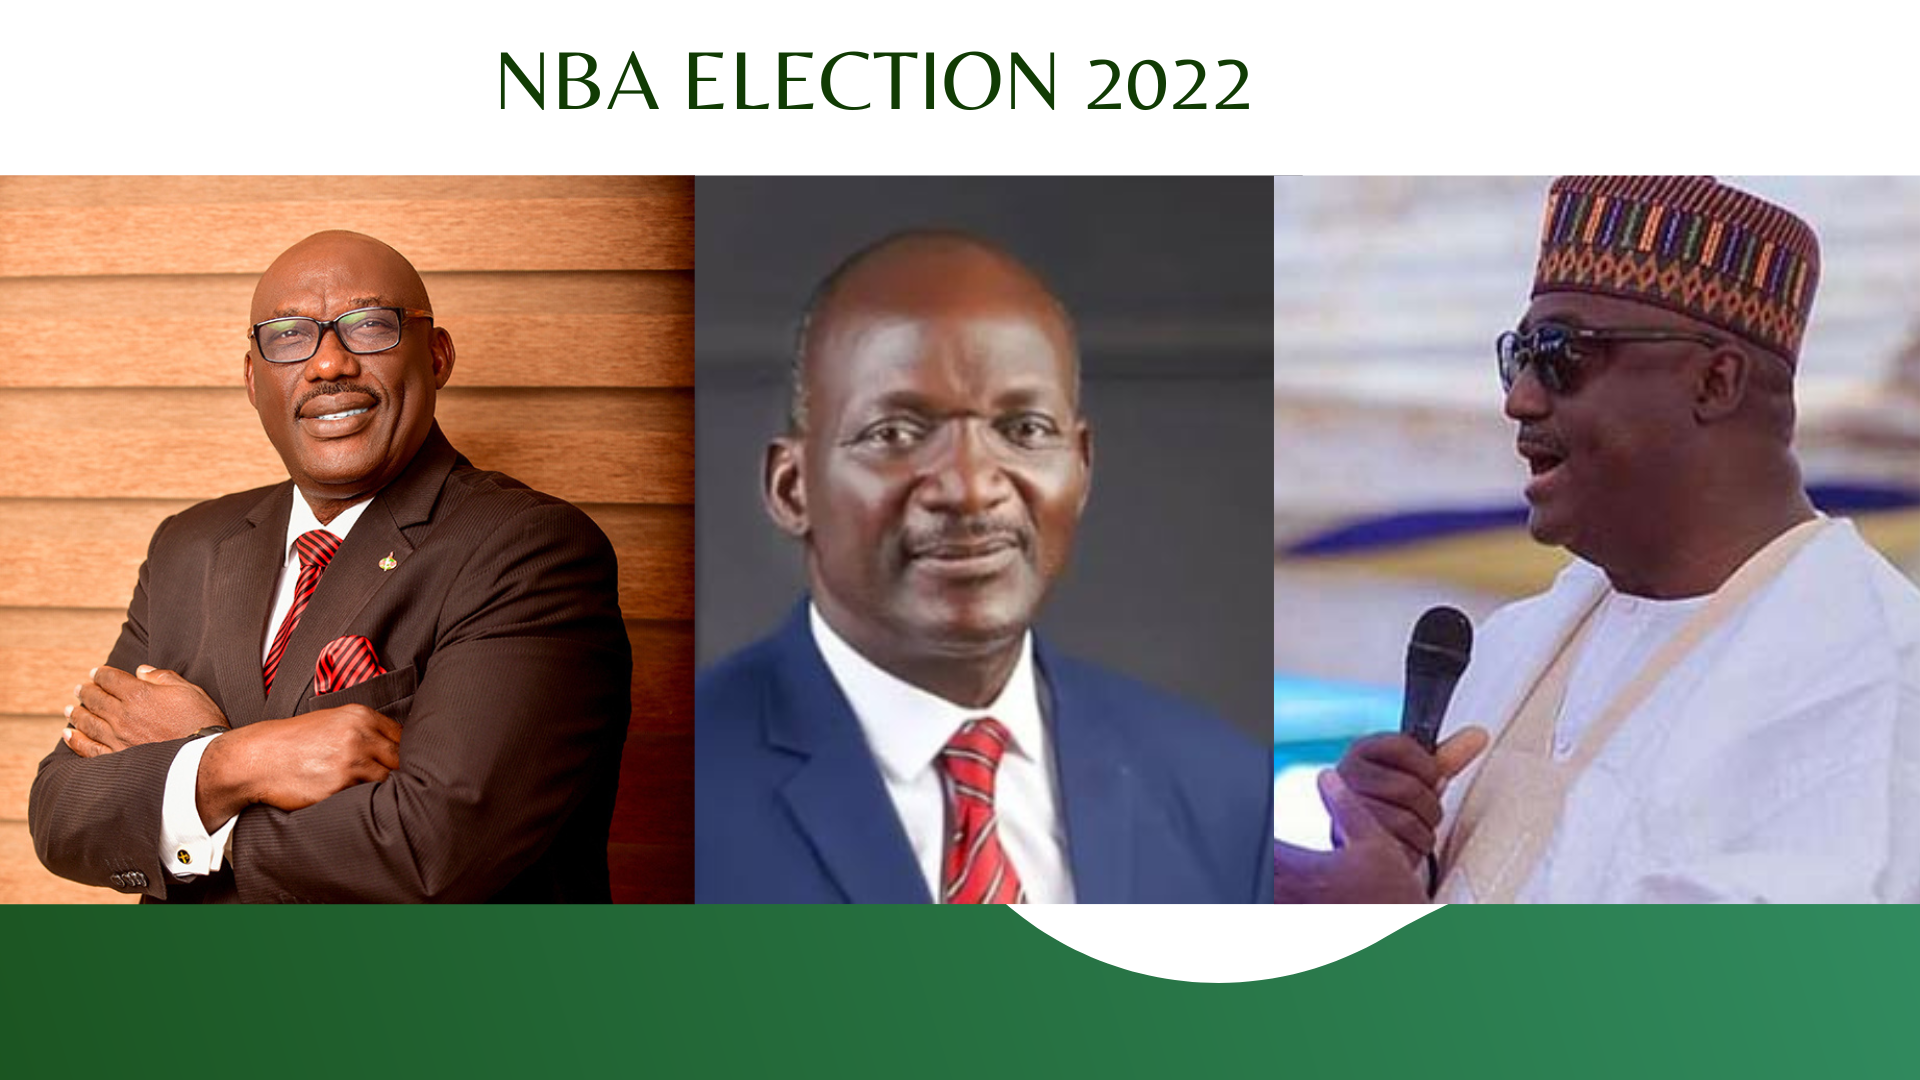 Why is there no young person running for NBA President this year? This is what lawyers should know